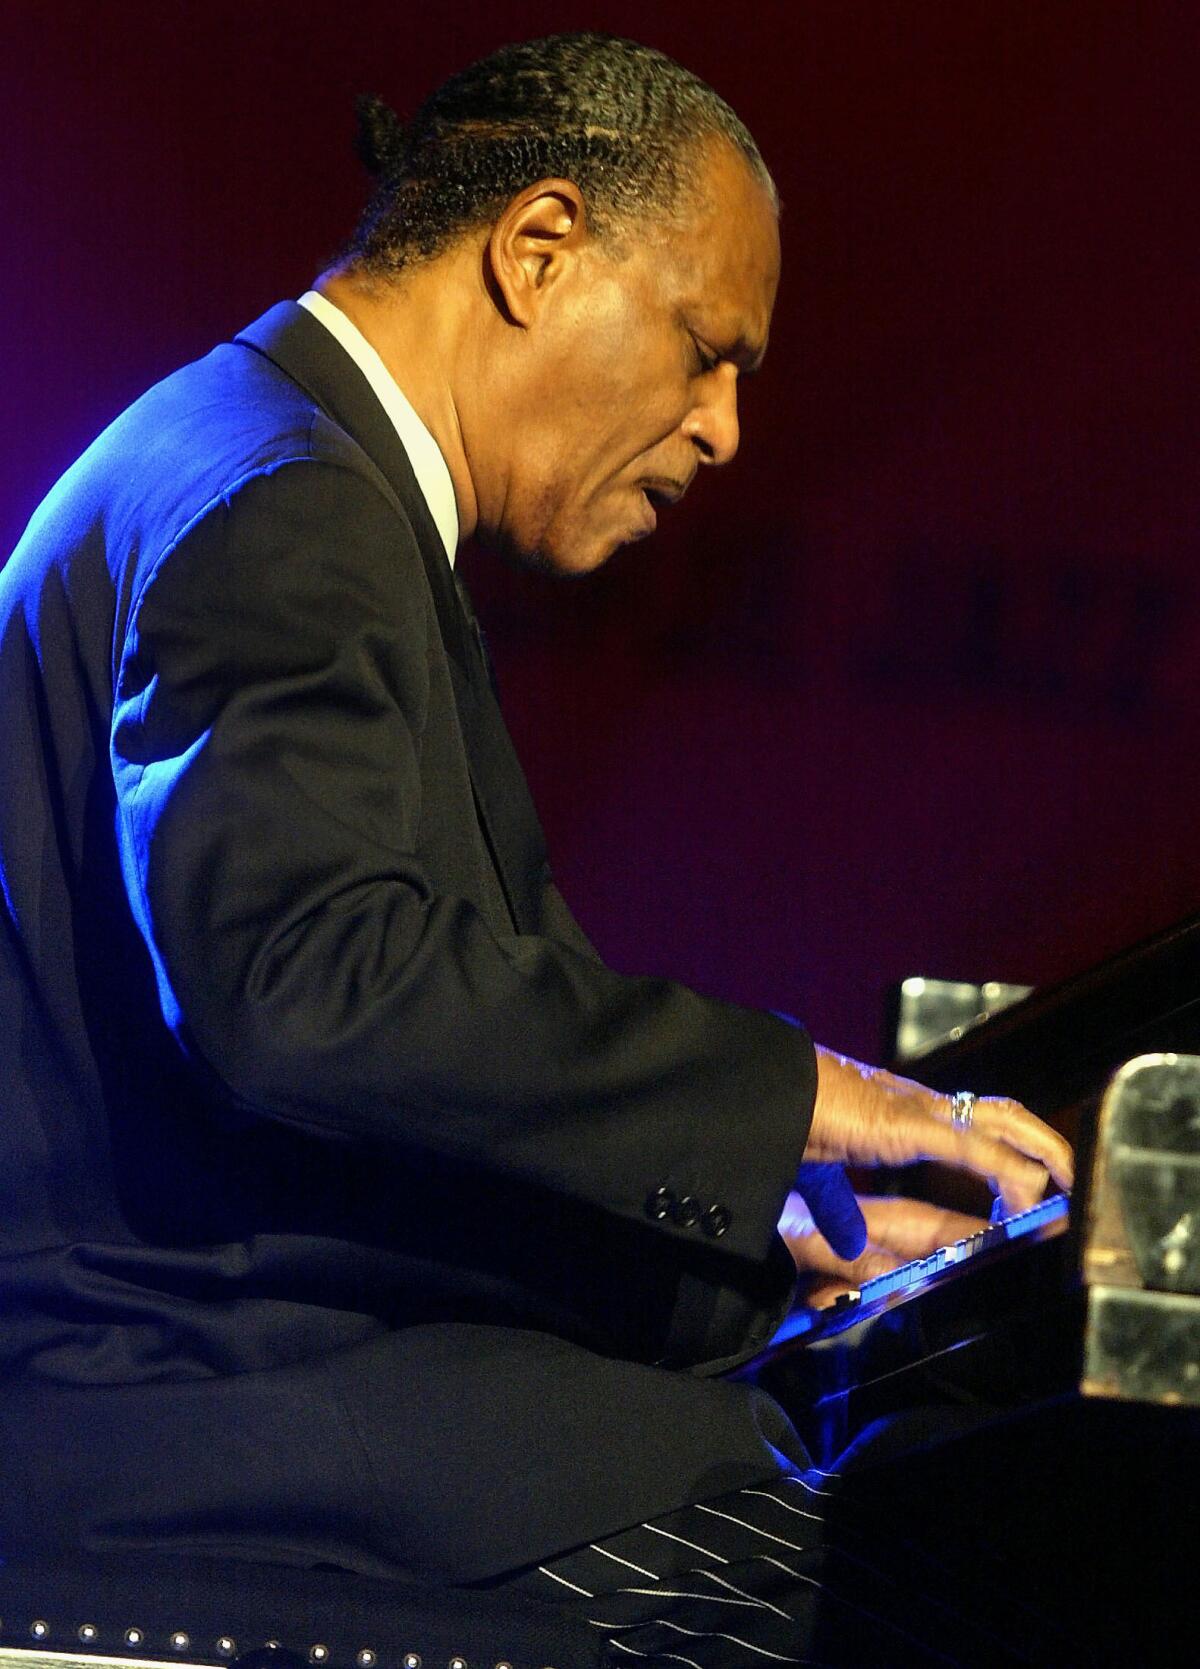 McCoy Tyner playing piano at a jazz festival in Macedonia in 2004.